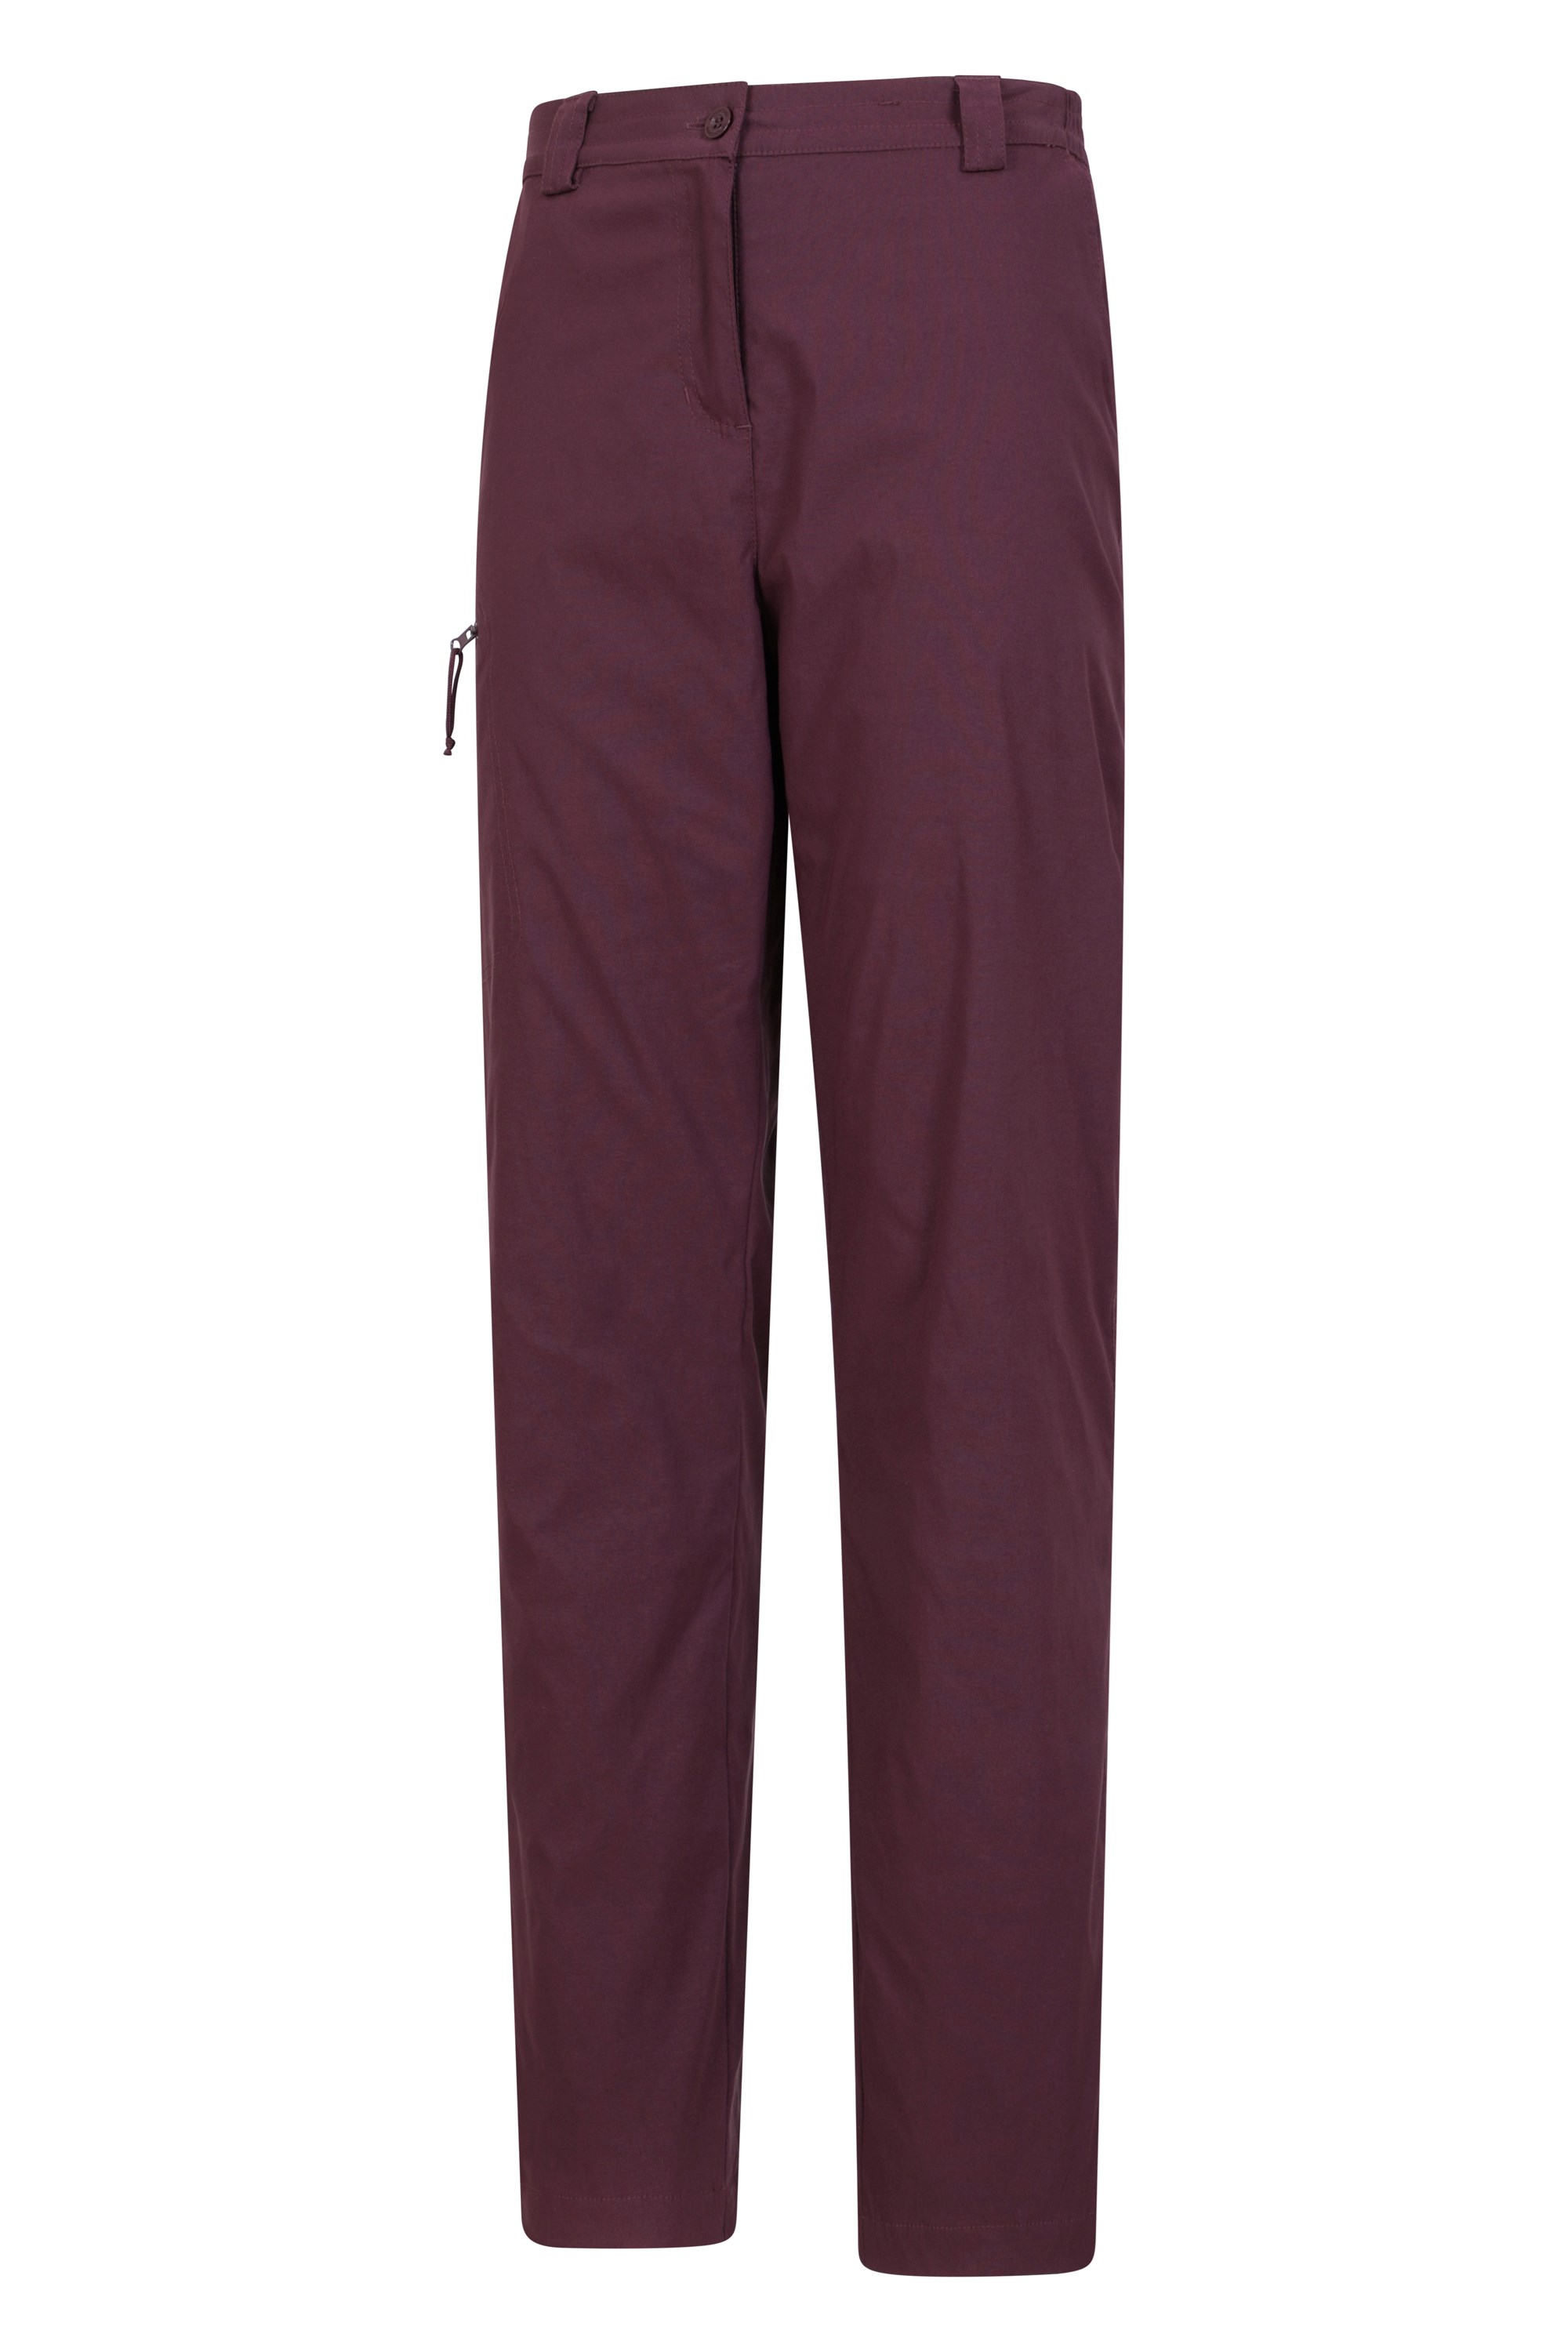 Women's Outdoor Pants | Buy Women's Outdoor Pants here | Outnorth